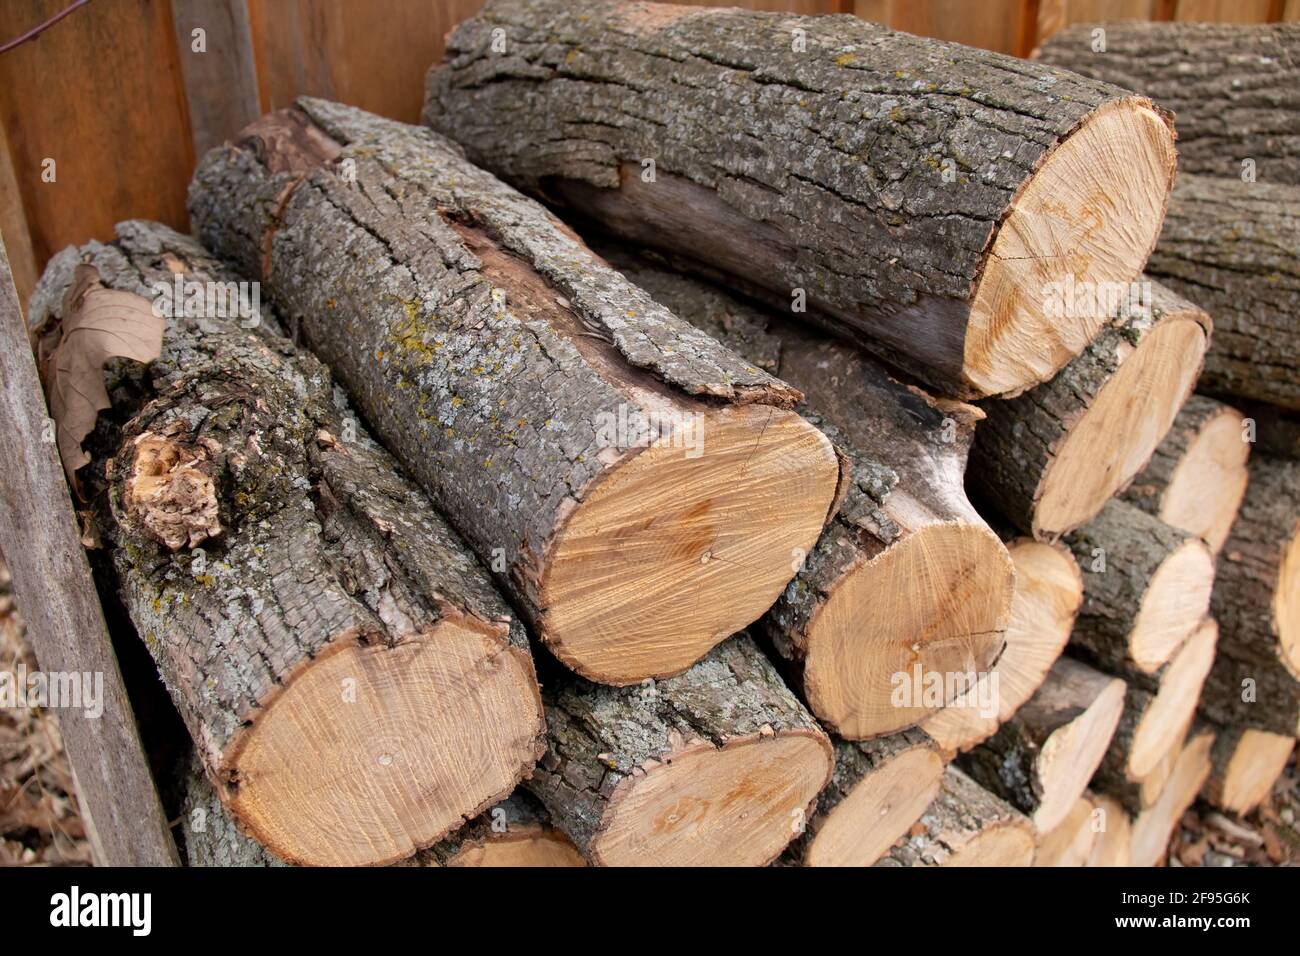 A stack of dry chopped fire wood logs, light-colored wood with mossy bark attached against a wooden barn in Ontario, Canada. Angled top view. Stock Photo